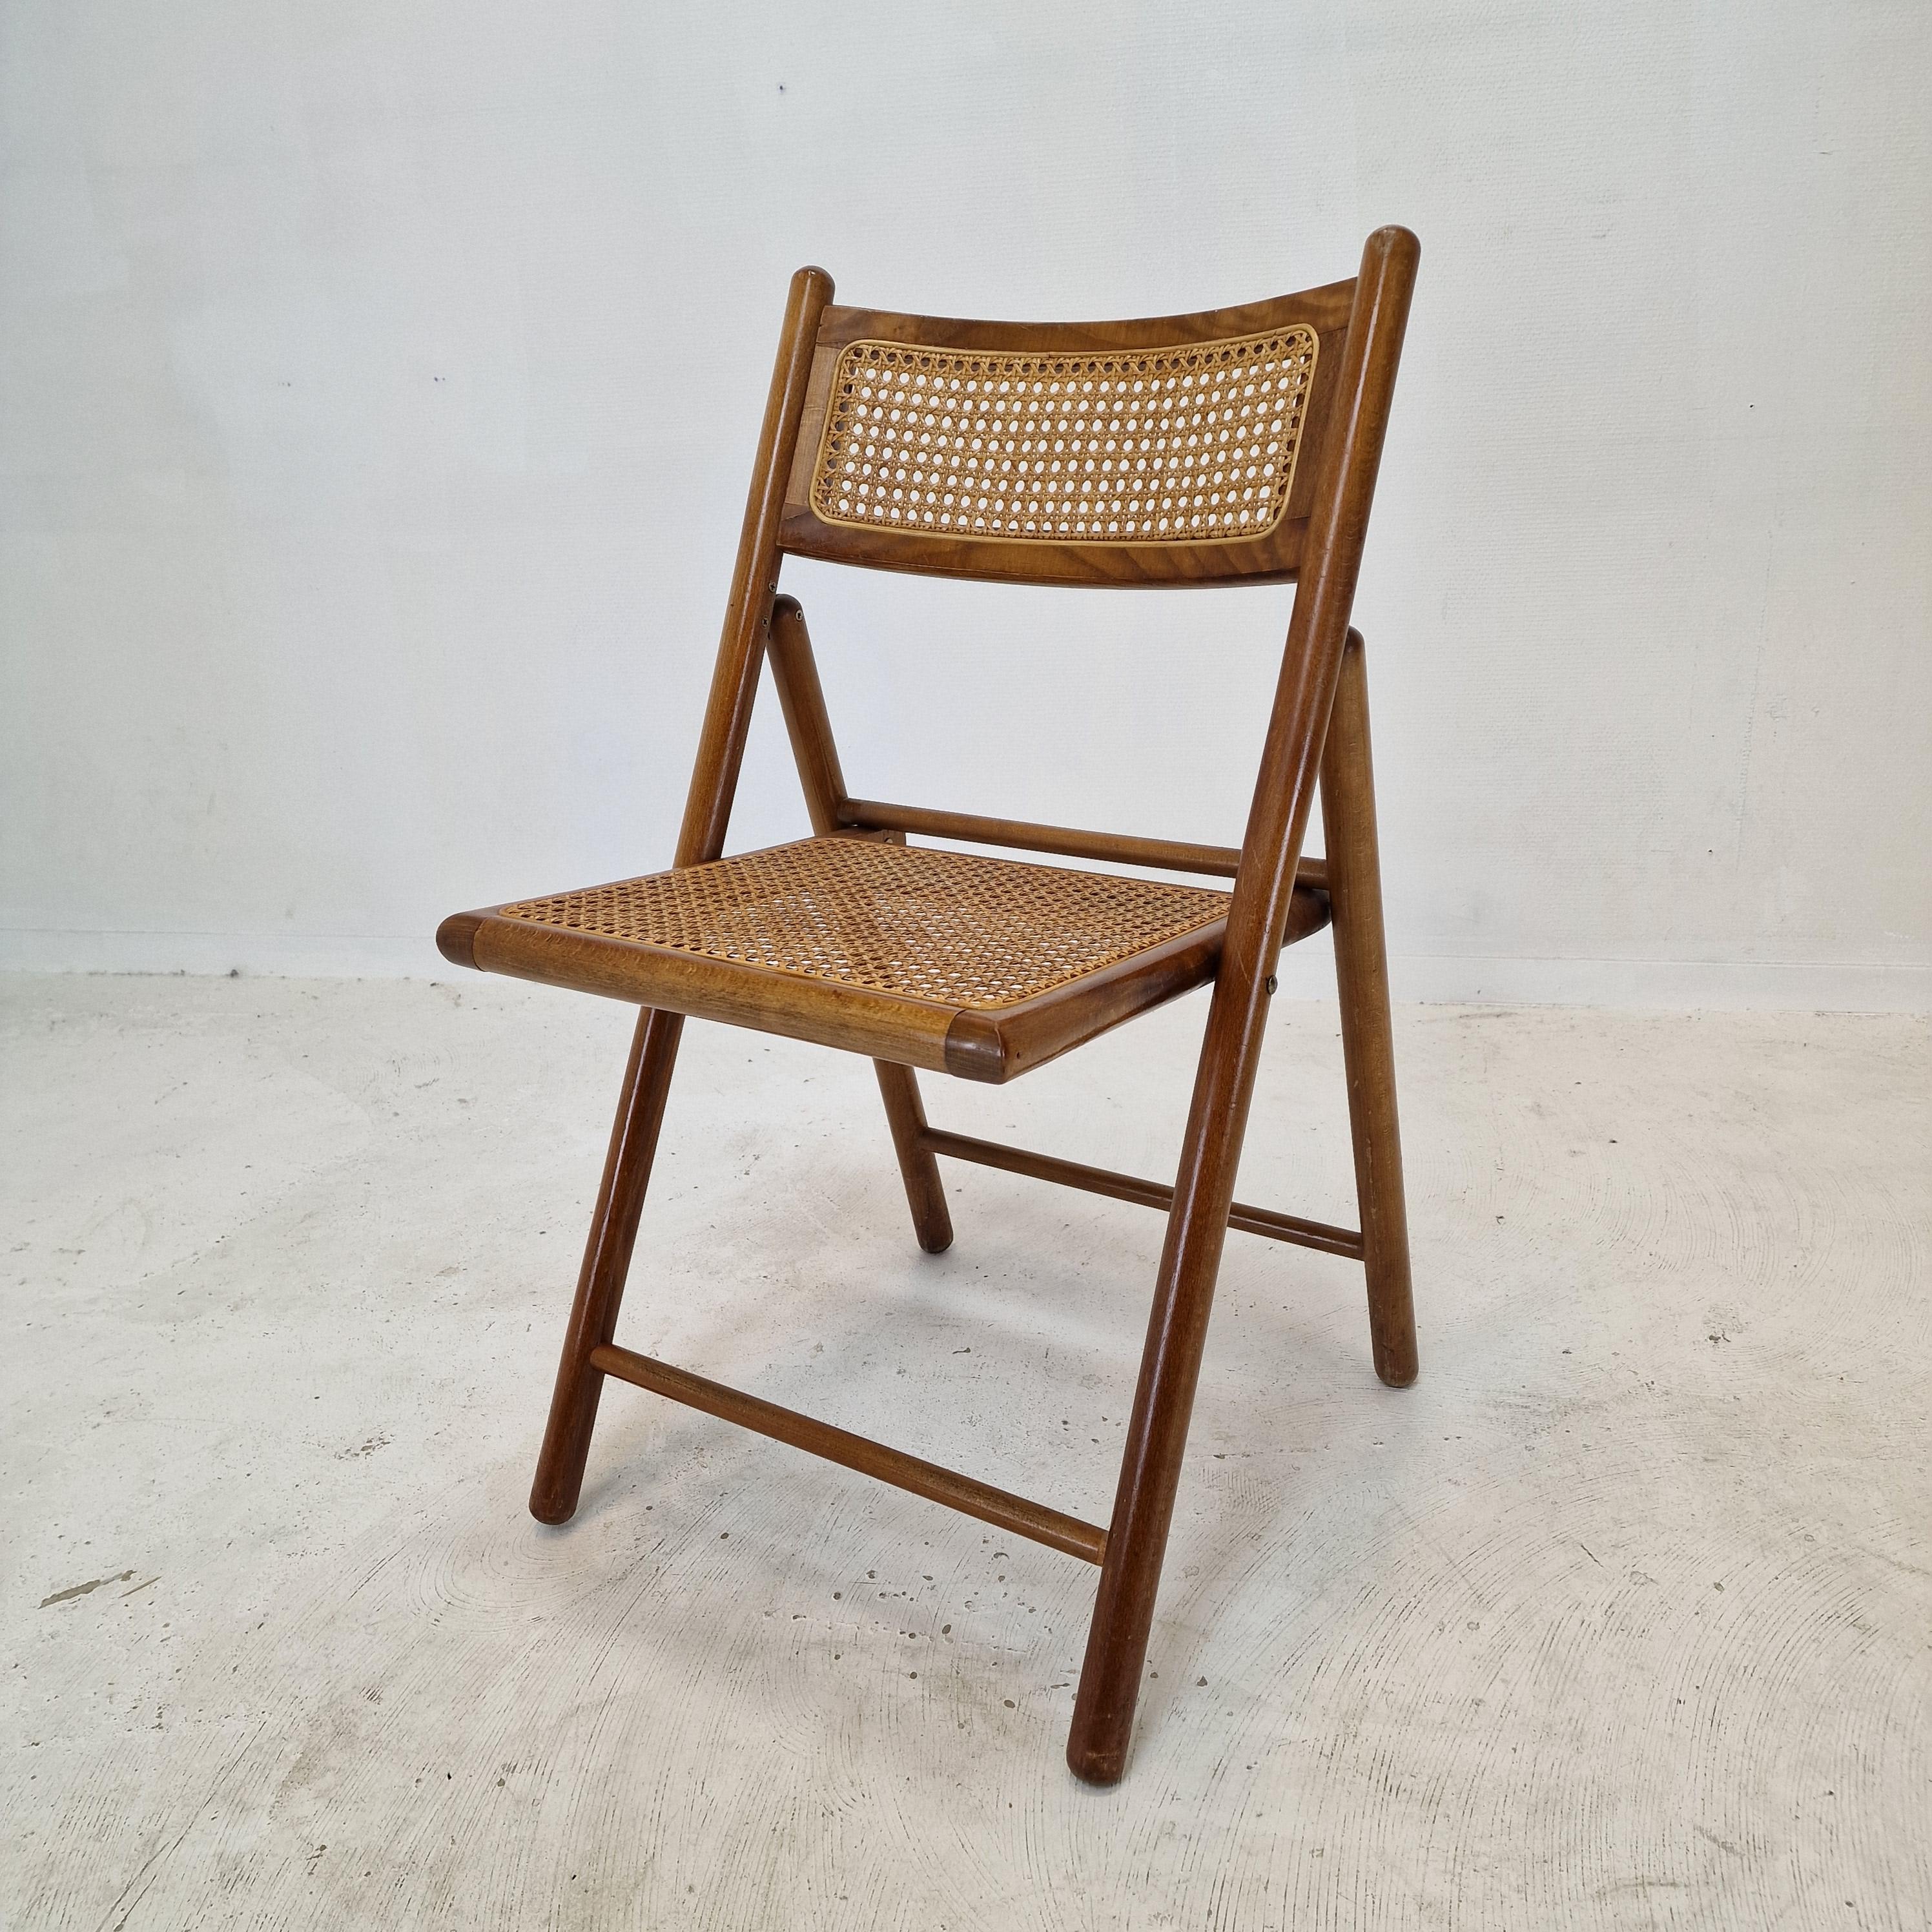 Set of 4 Italian Folding Chairs with Rattan, 1980s For Sale 3